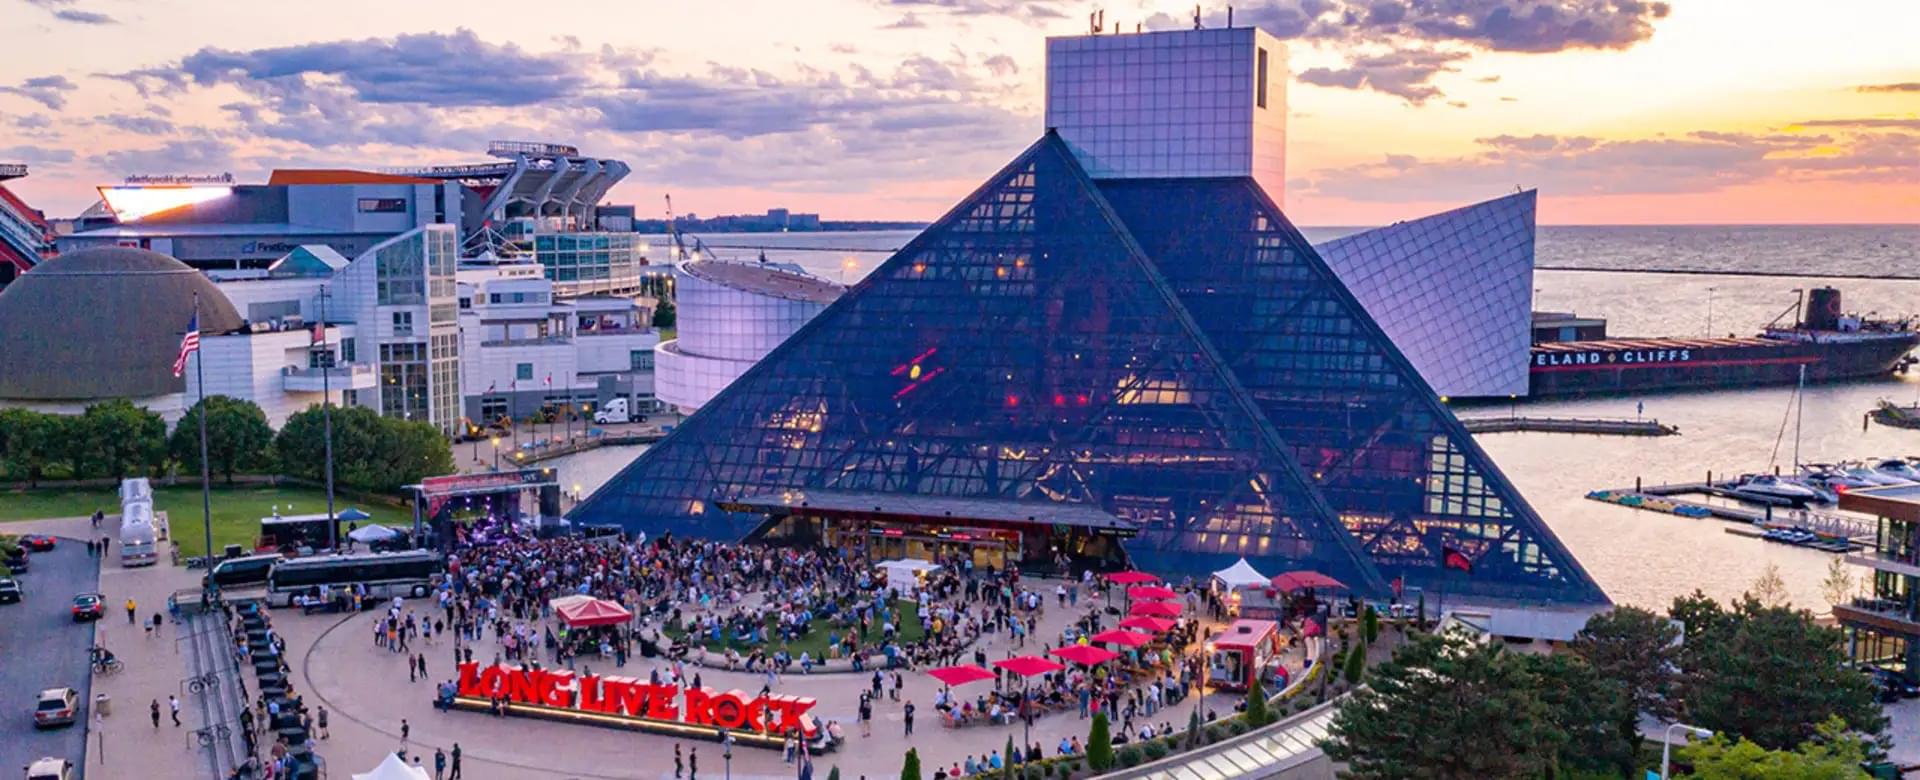 Rock and Roll Hall of Fame Overview